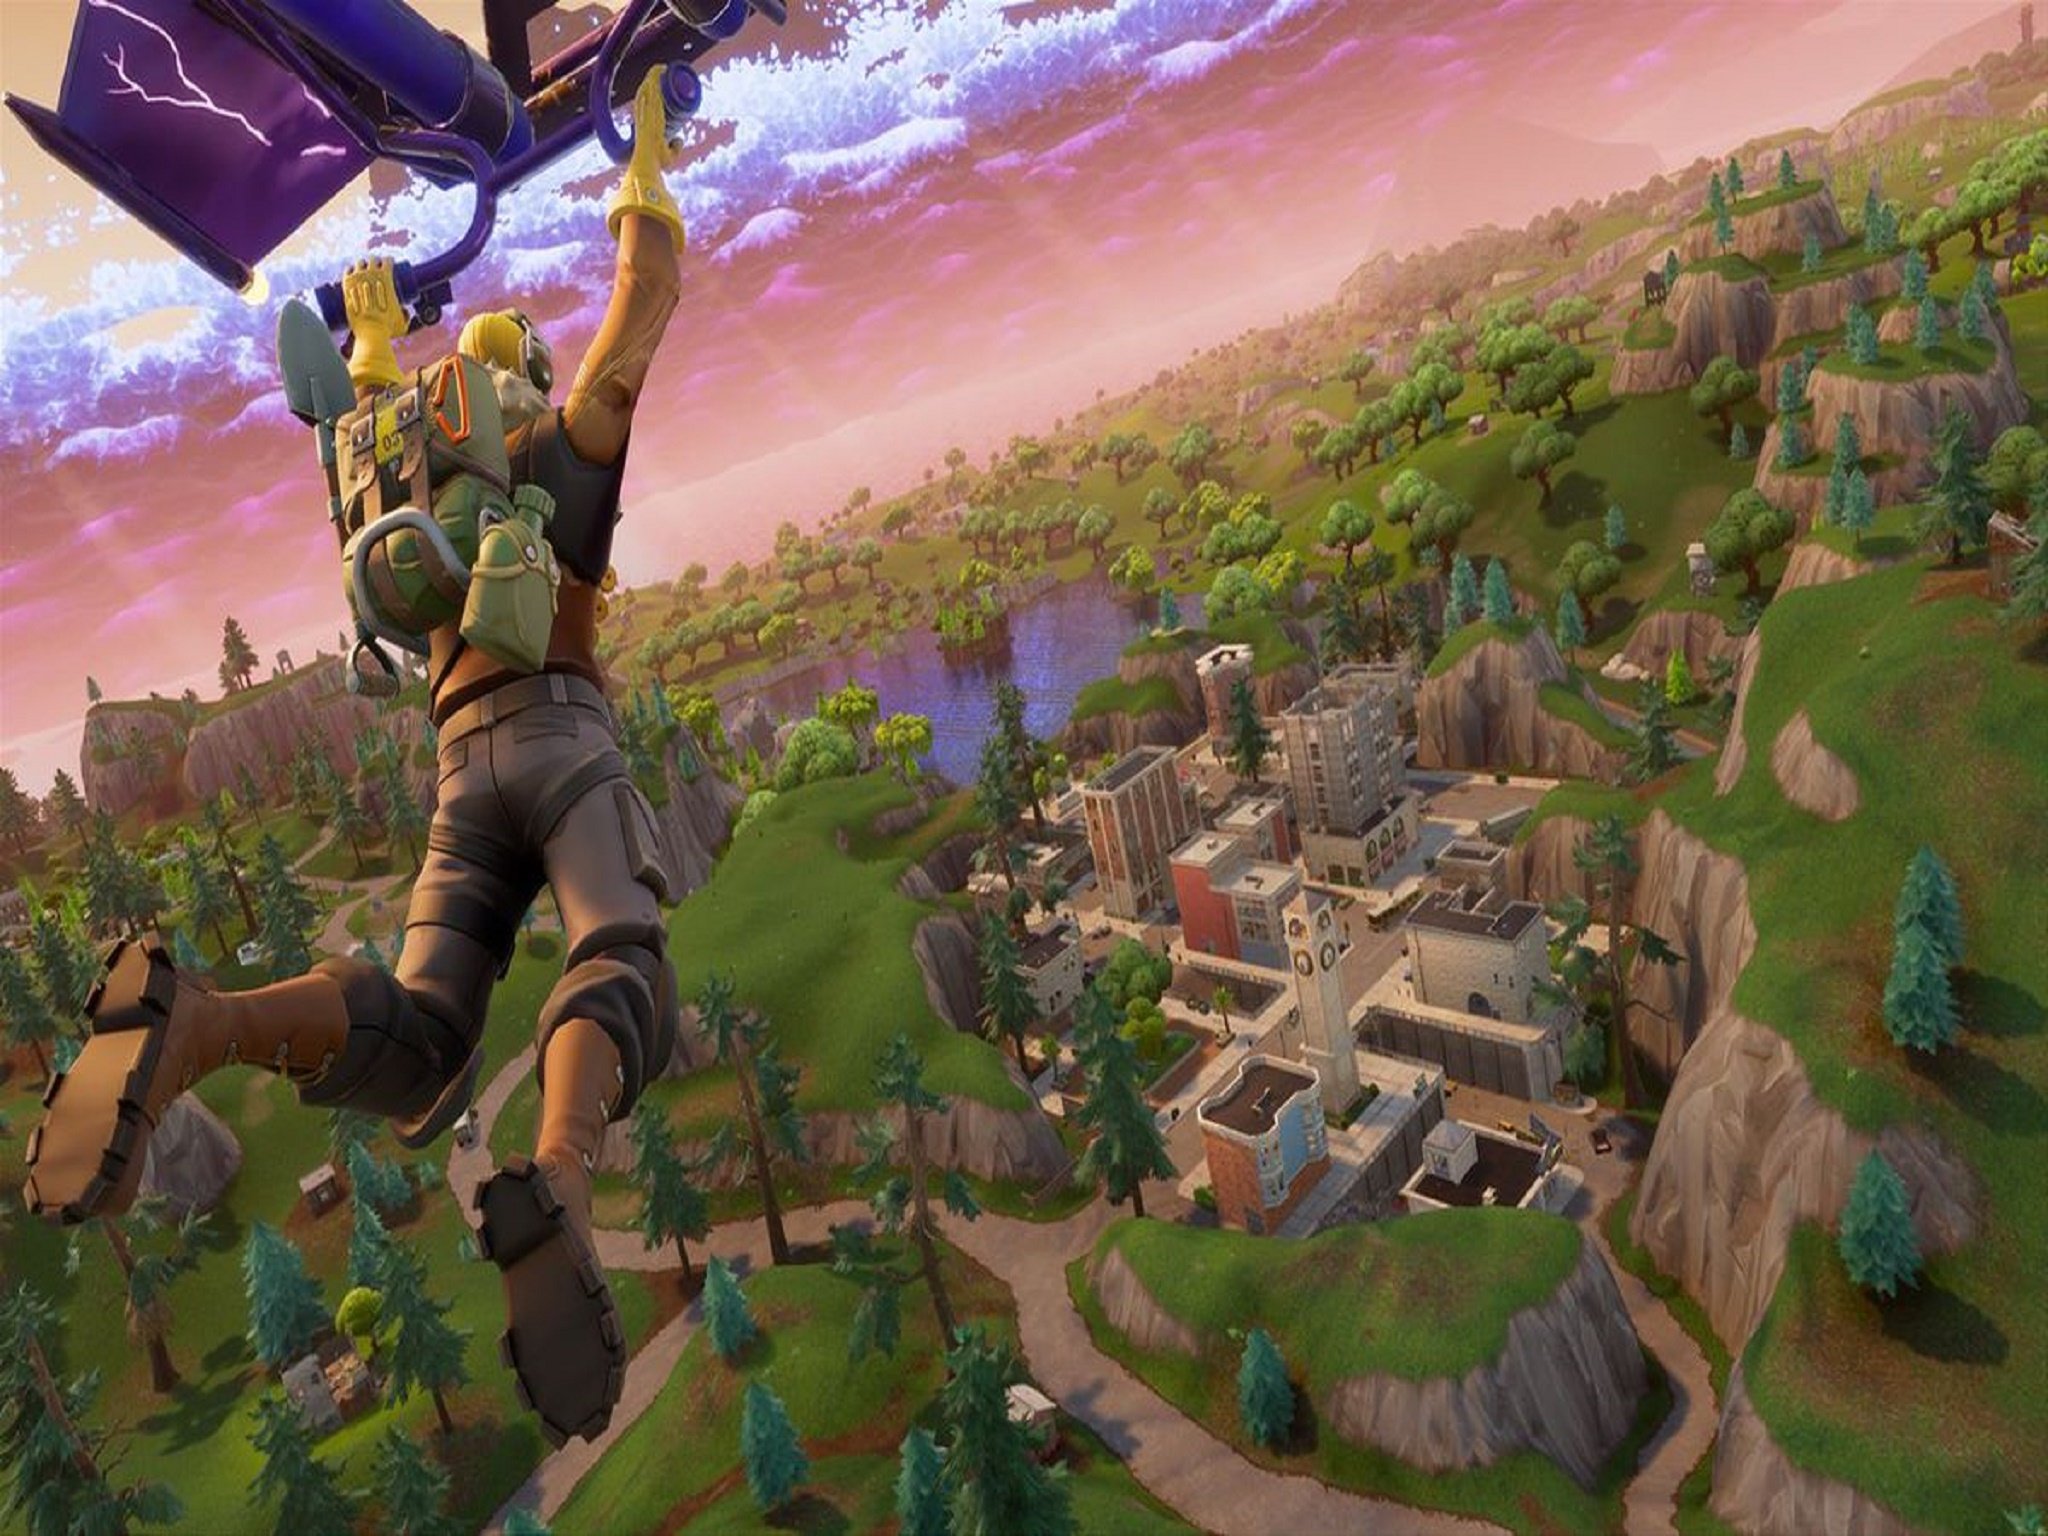 epic games working on ways to unlink fortnite accounts from consoles merge purchases from the shop - best fortnite account sellers